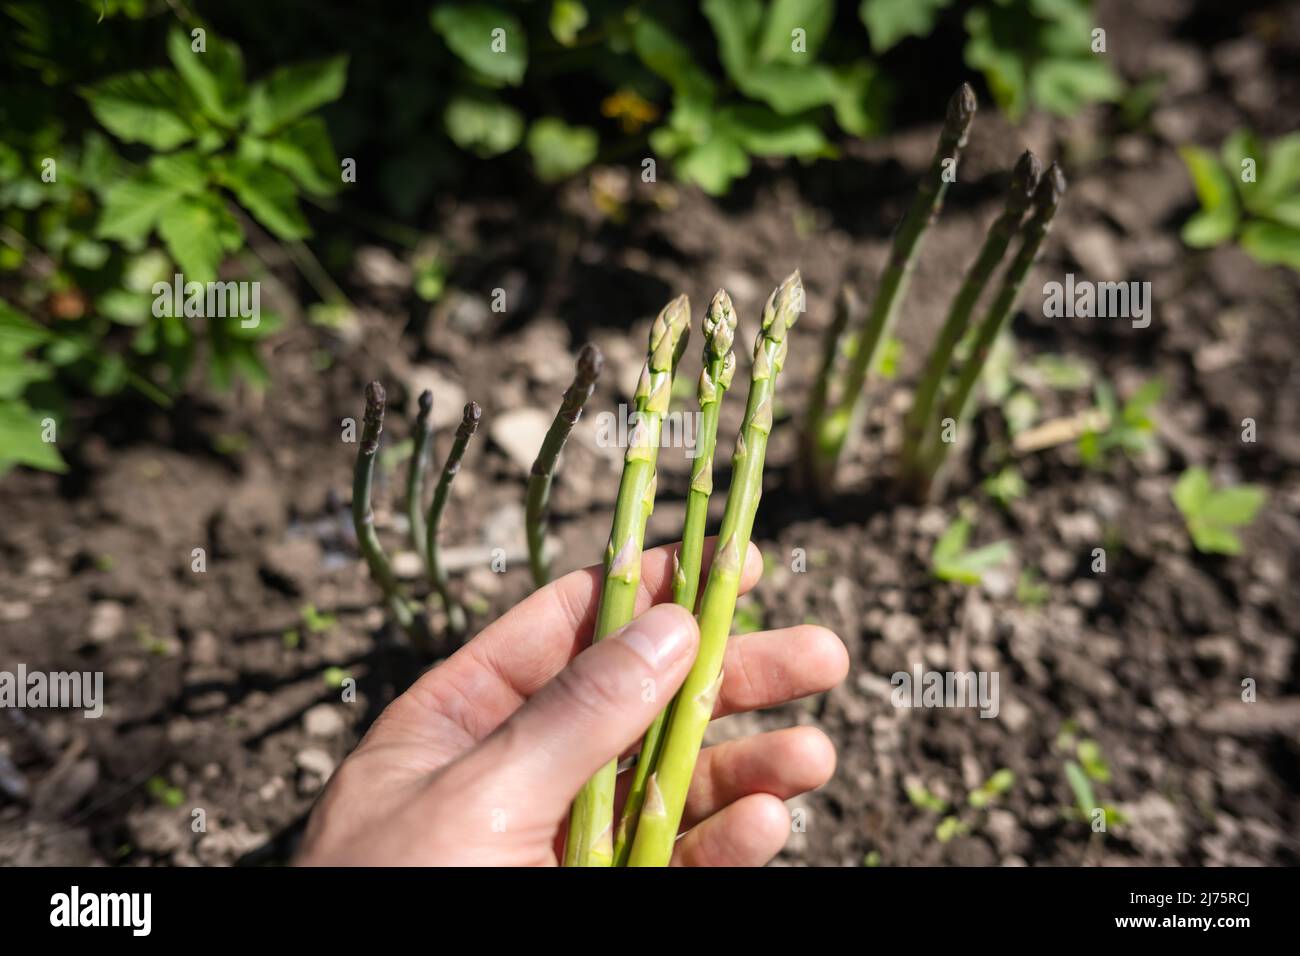 Asparagus sprouts in hands of a farmer on garden. Fresh green asparagus sprouts. Food photography Stock Photo